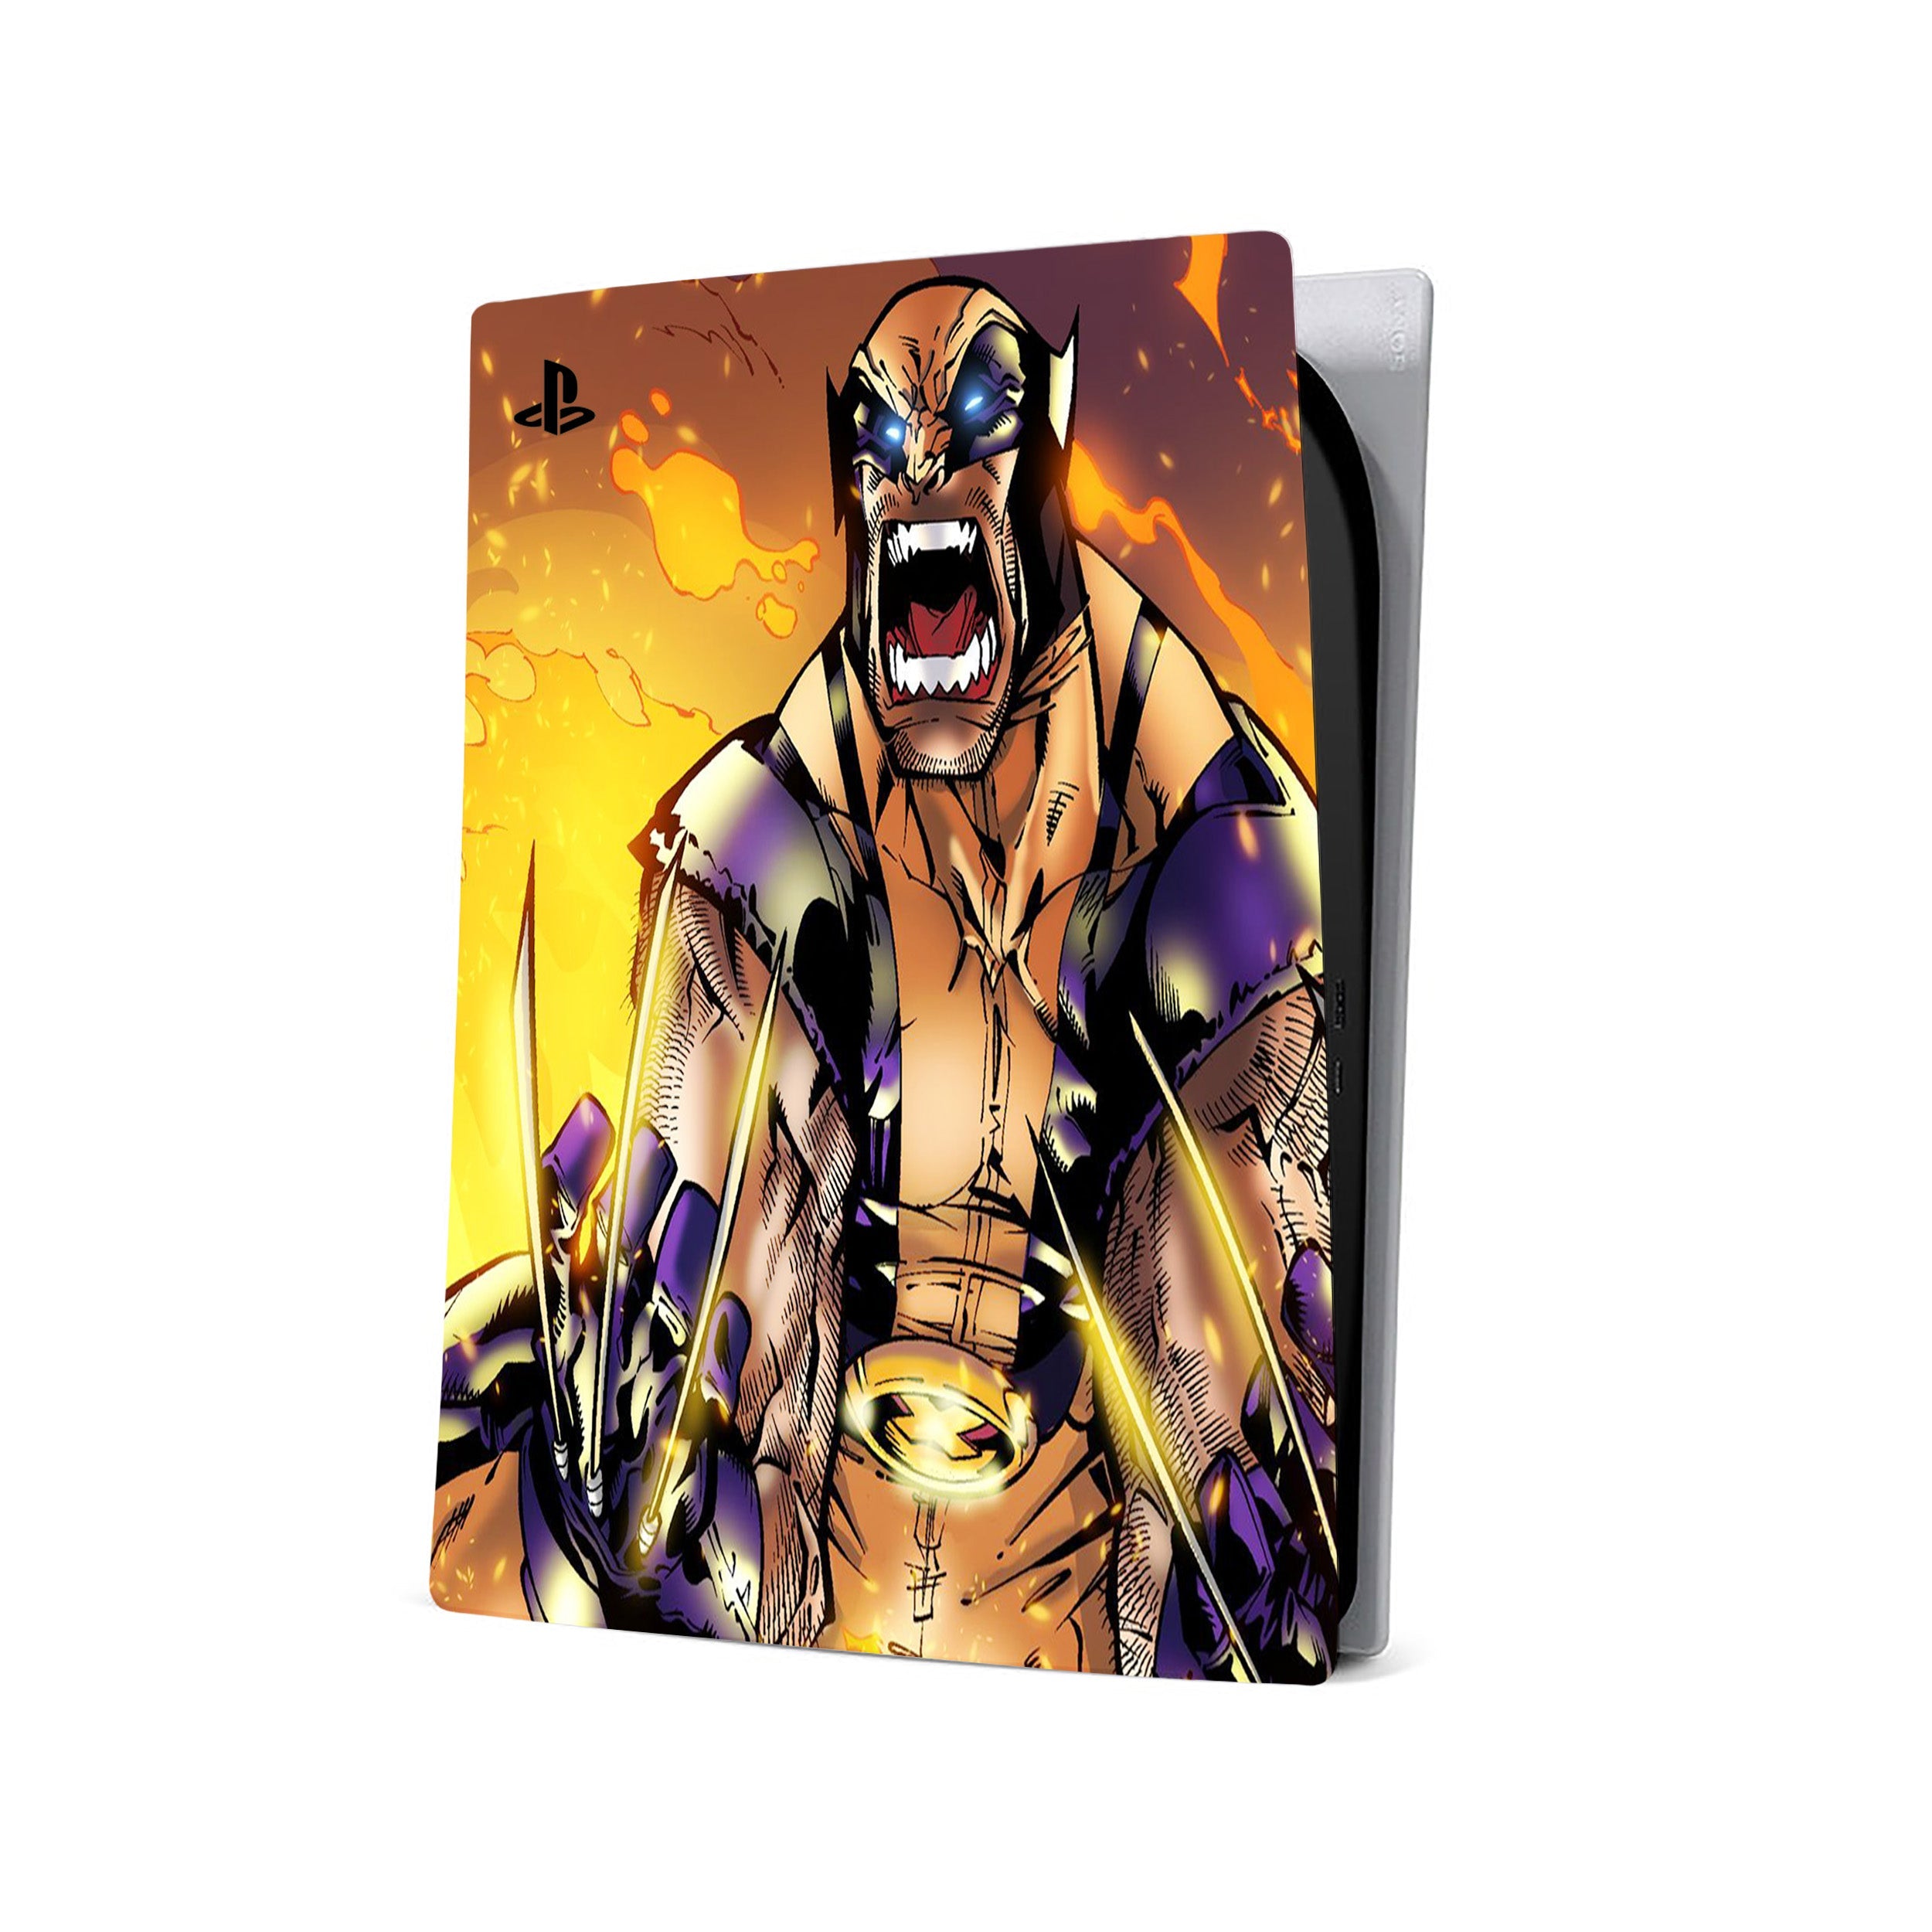 A video game skin featuring a Marvel X Men Wolverine design for the PS5.